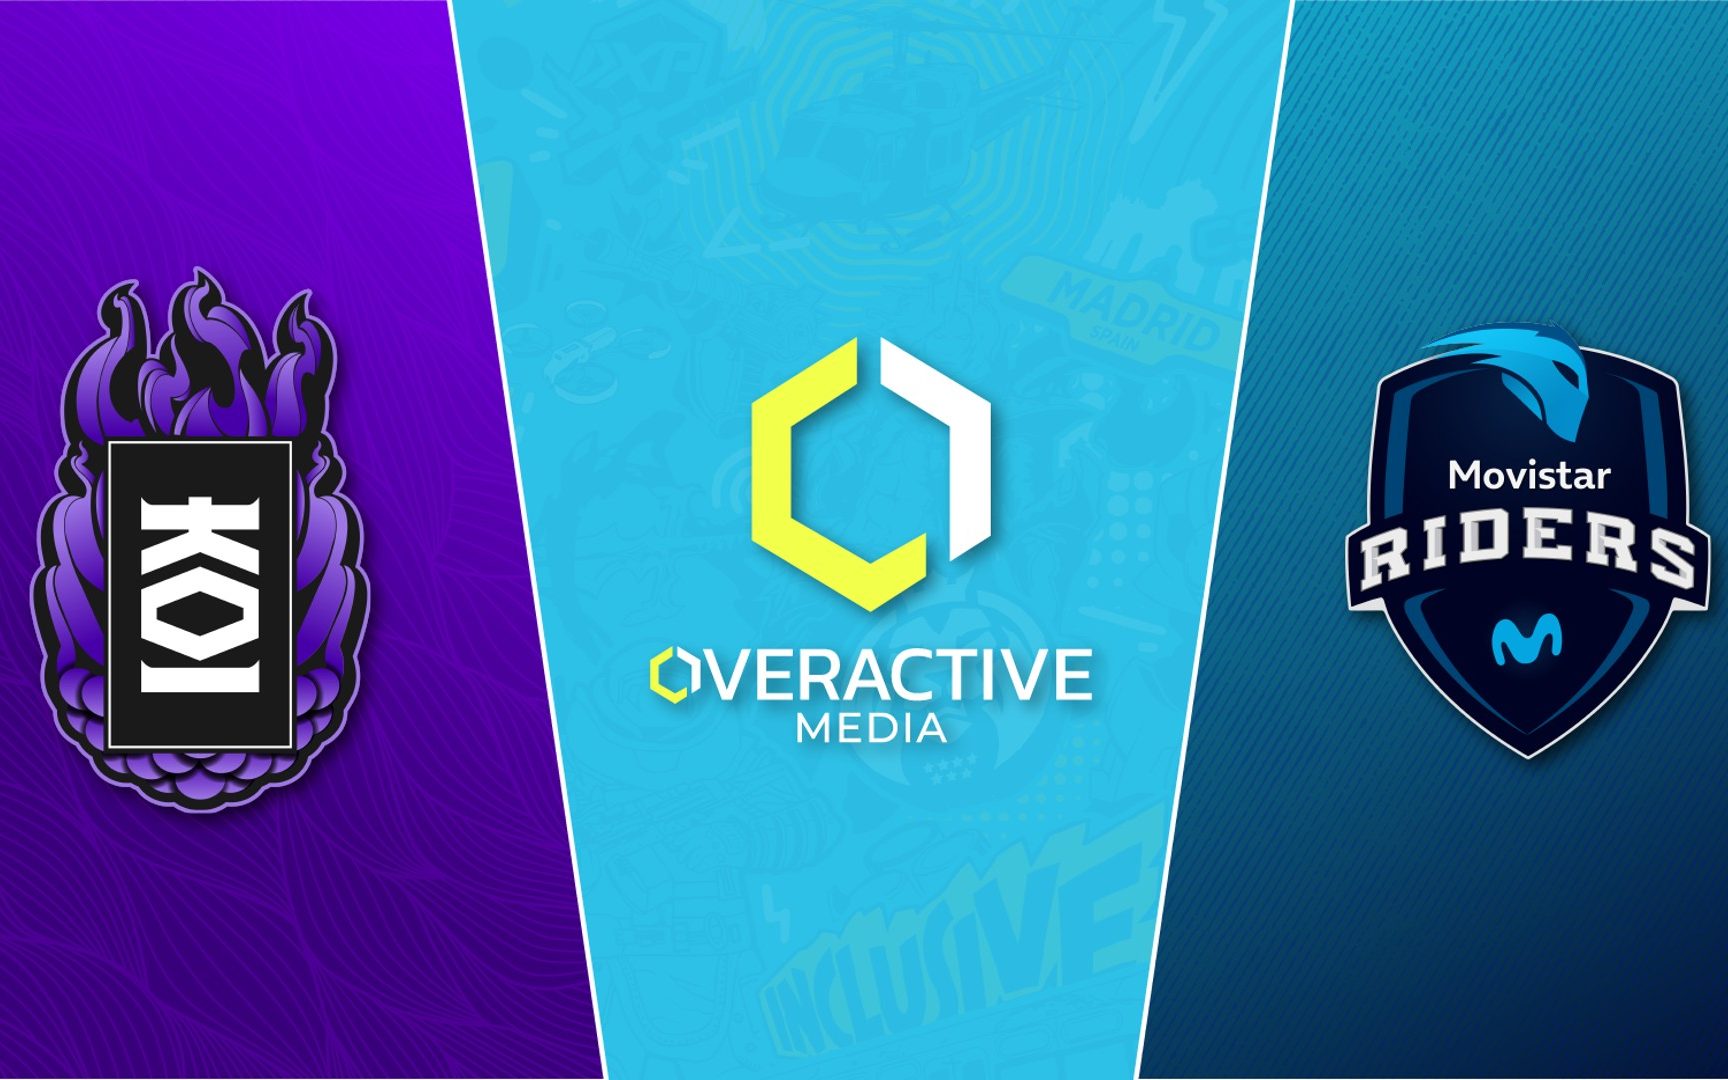 Image of OverActive Media, KOI, and Movistar Riders logos on blue and purple background